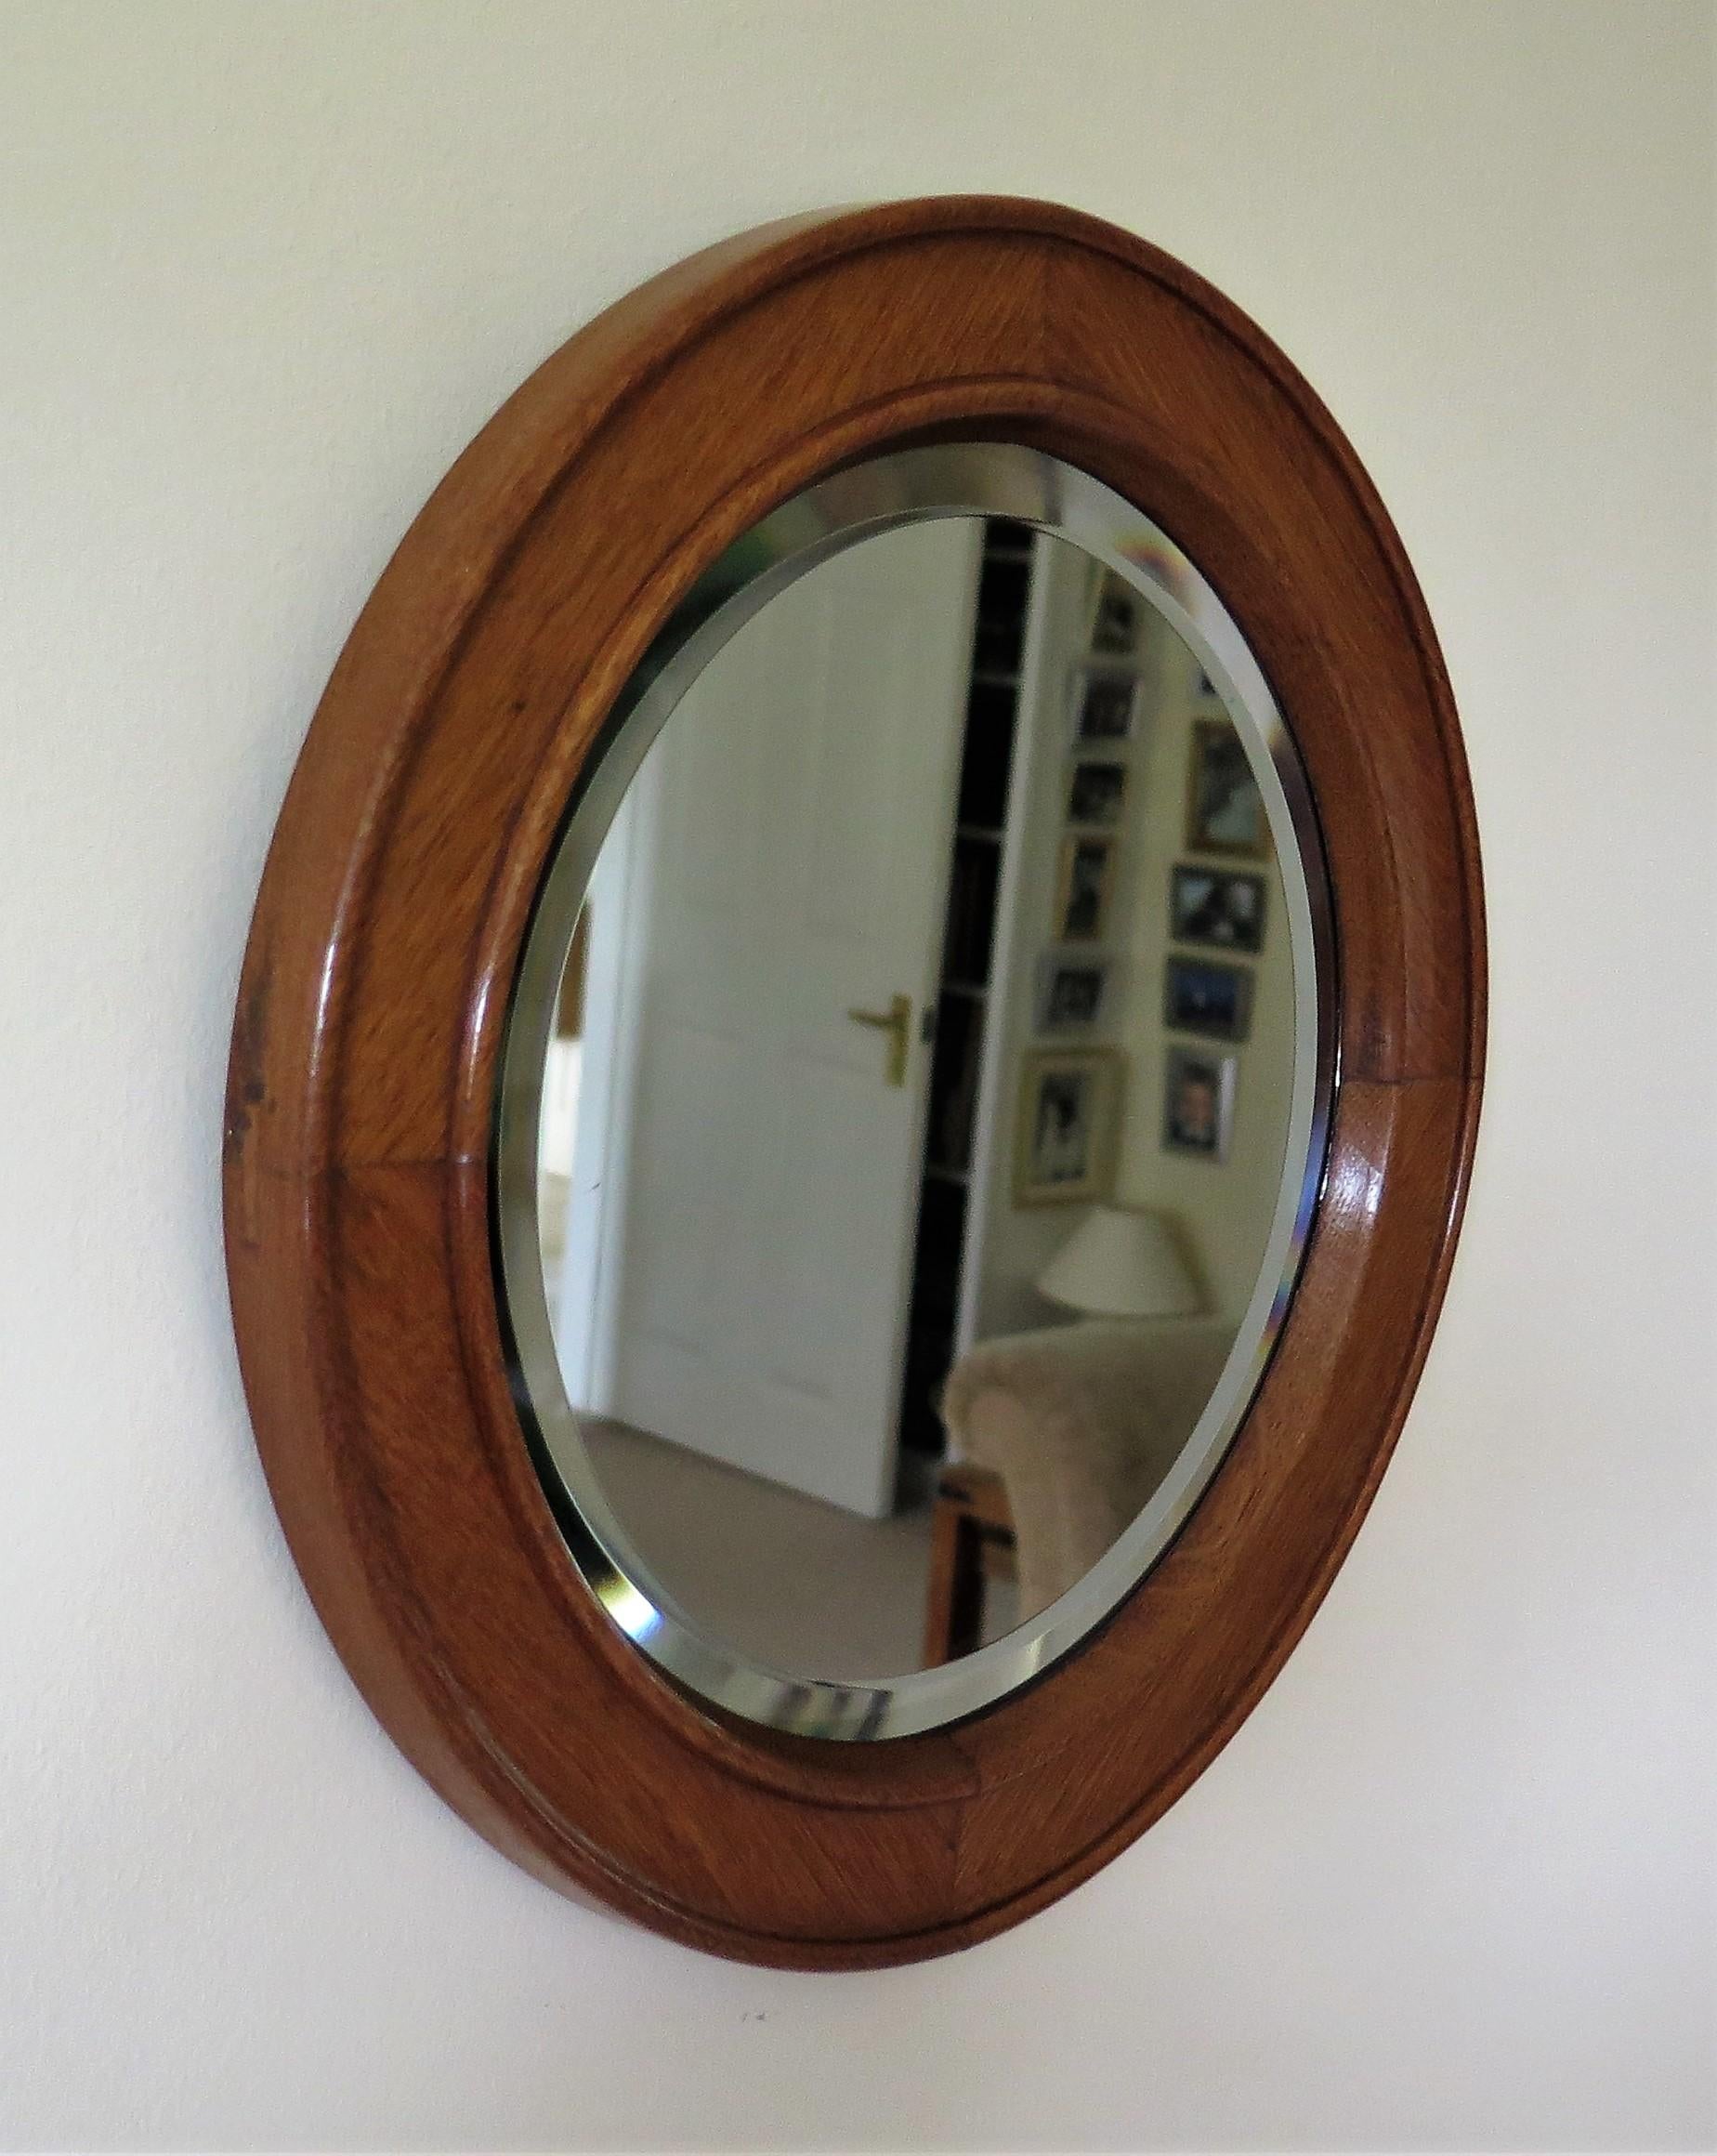 Arts and Crafts 19th C. Arts & Crafts Circular Wall Mirror Golden Oak Jointed Frame Bevel Glass